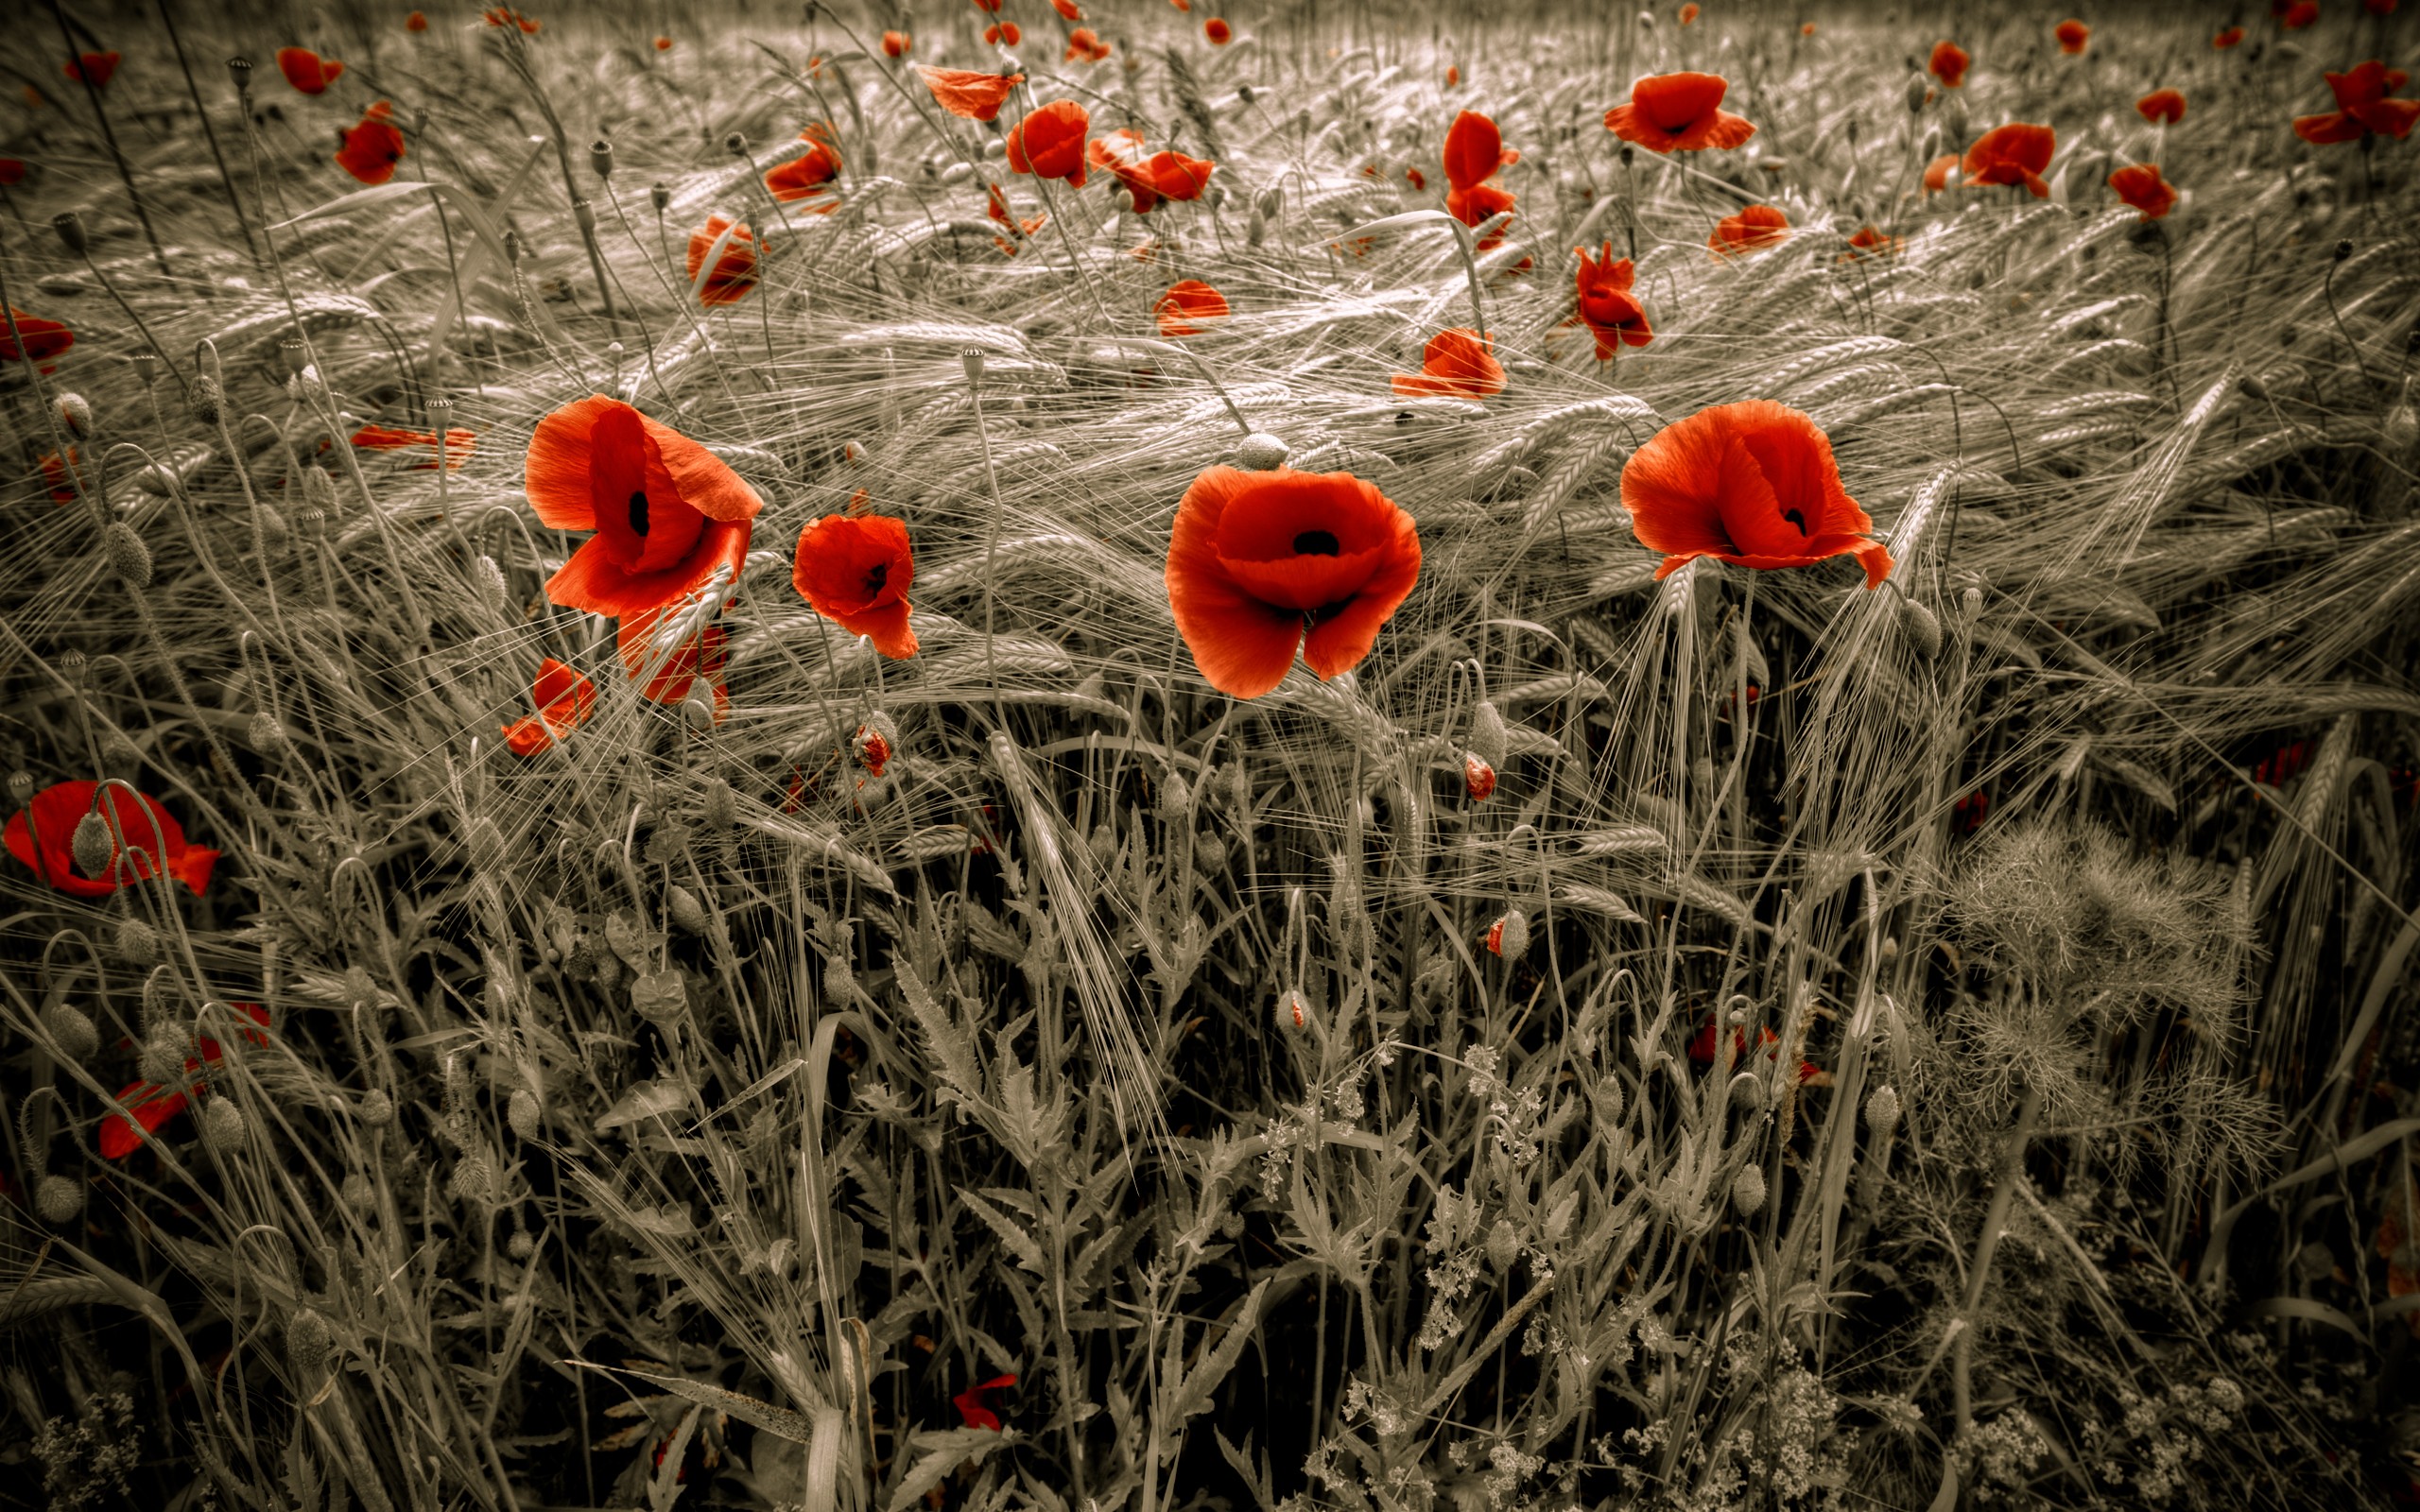 General 2560x1600 flowers poppies selective coloring plants red flowers outdoors